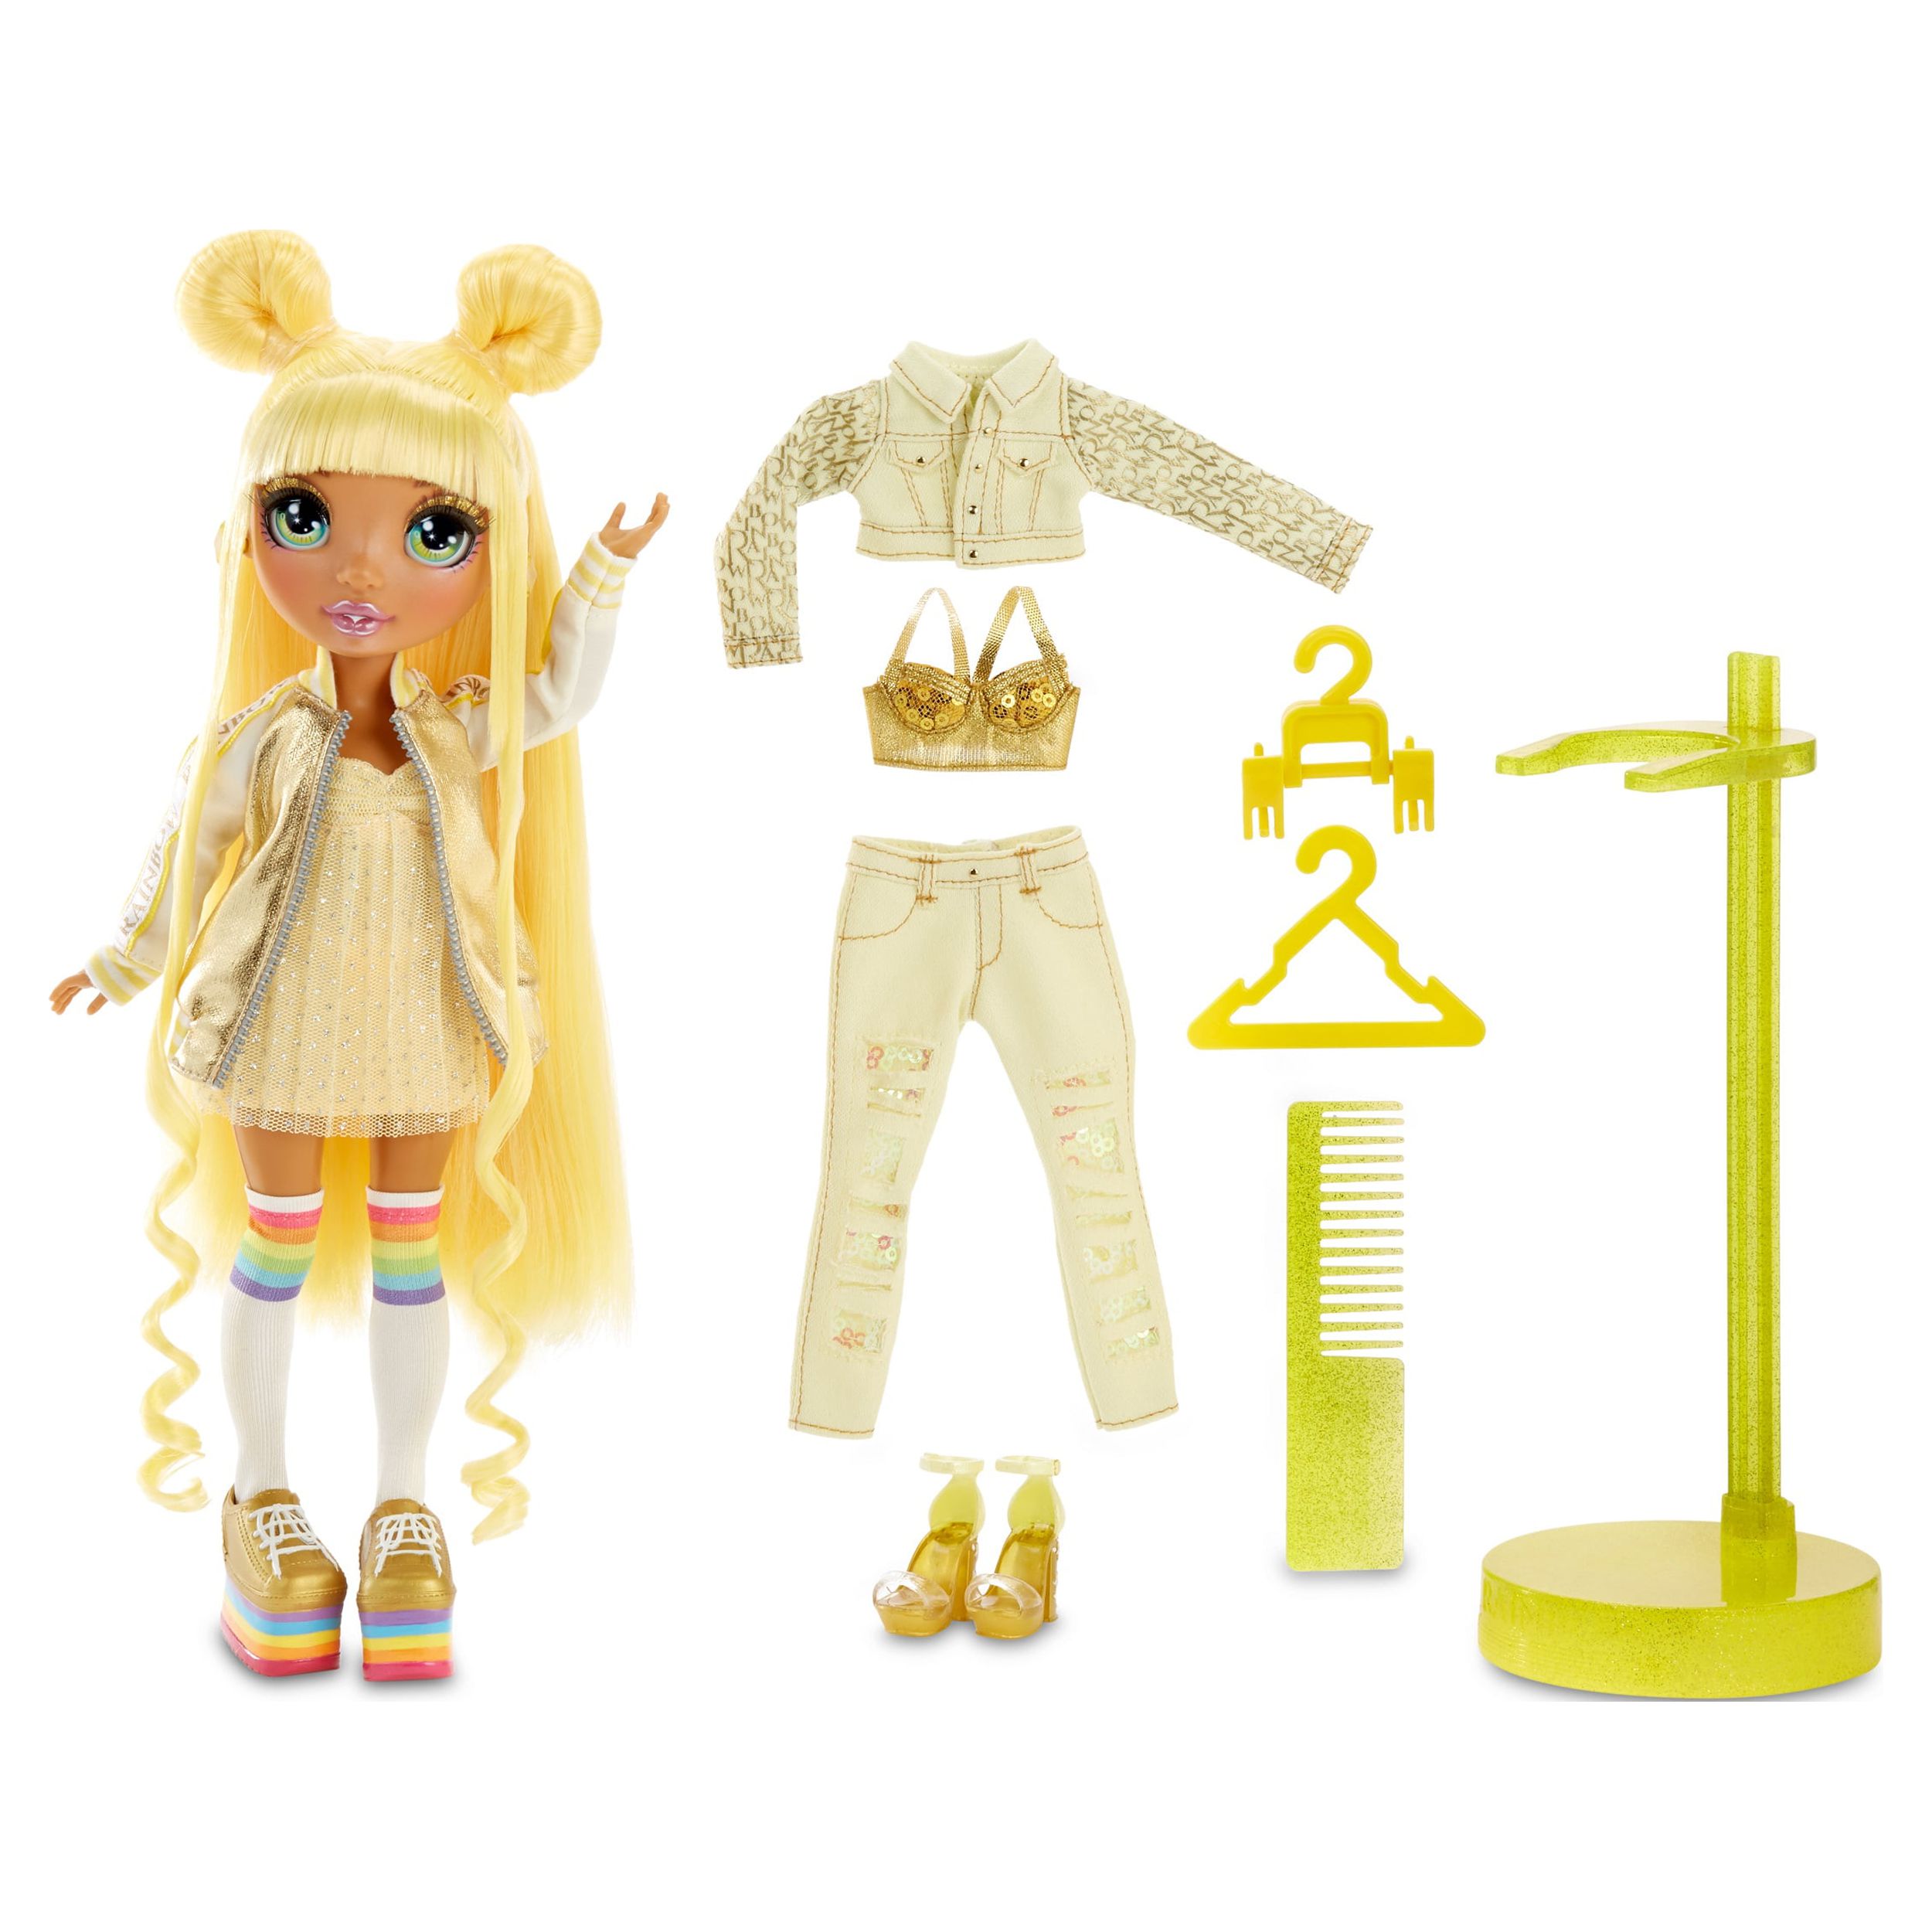 Rainbow High Sunny Madison – Yellow Fashion Doll with 2 Outfits - image 1 of 8